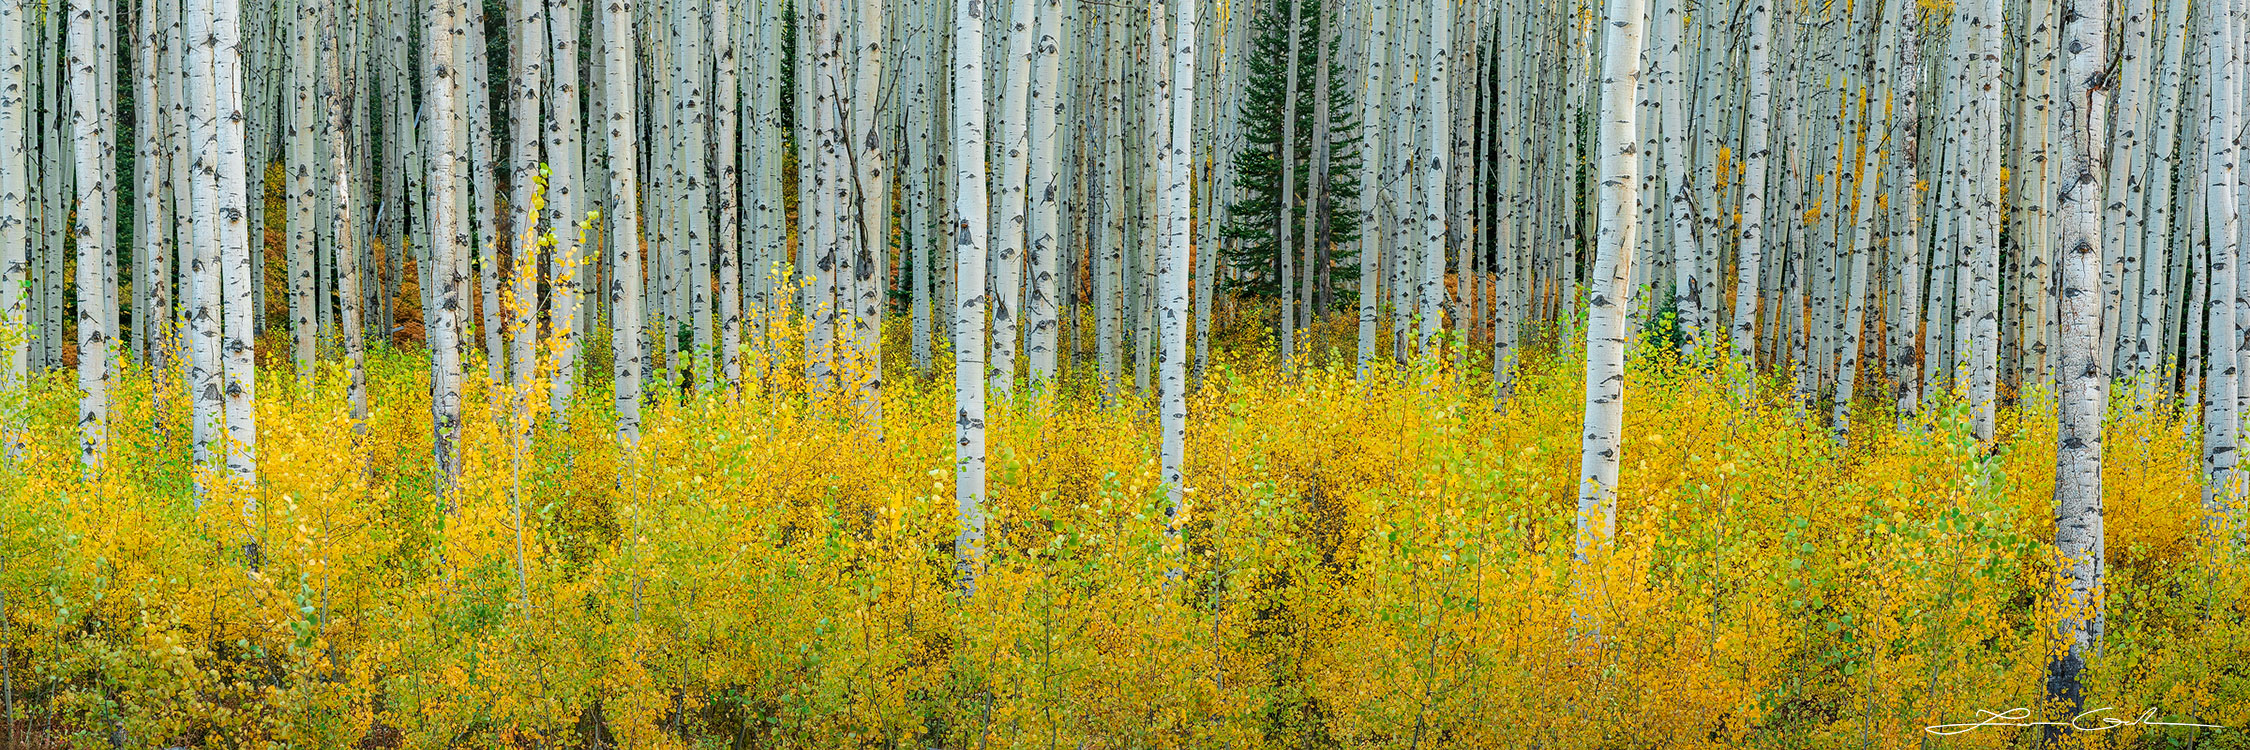 Autumnal Aspen Trees Fall Foliage: Dense forest scene with slender vertical trunks, yellowing leaves, and vibrant colors. Captivating contrast between warm foliage and cool trunks. Resembles a Bev Doolittle painting. - Gintchin Fine Art